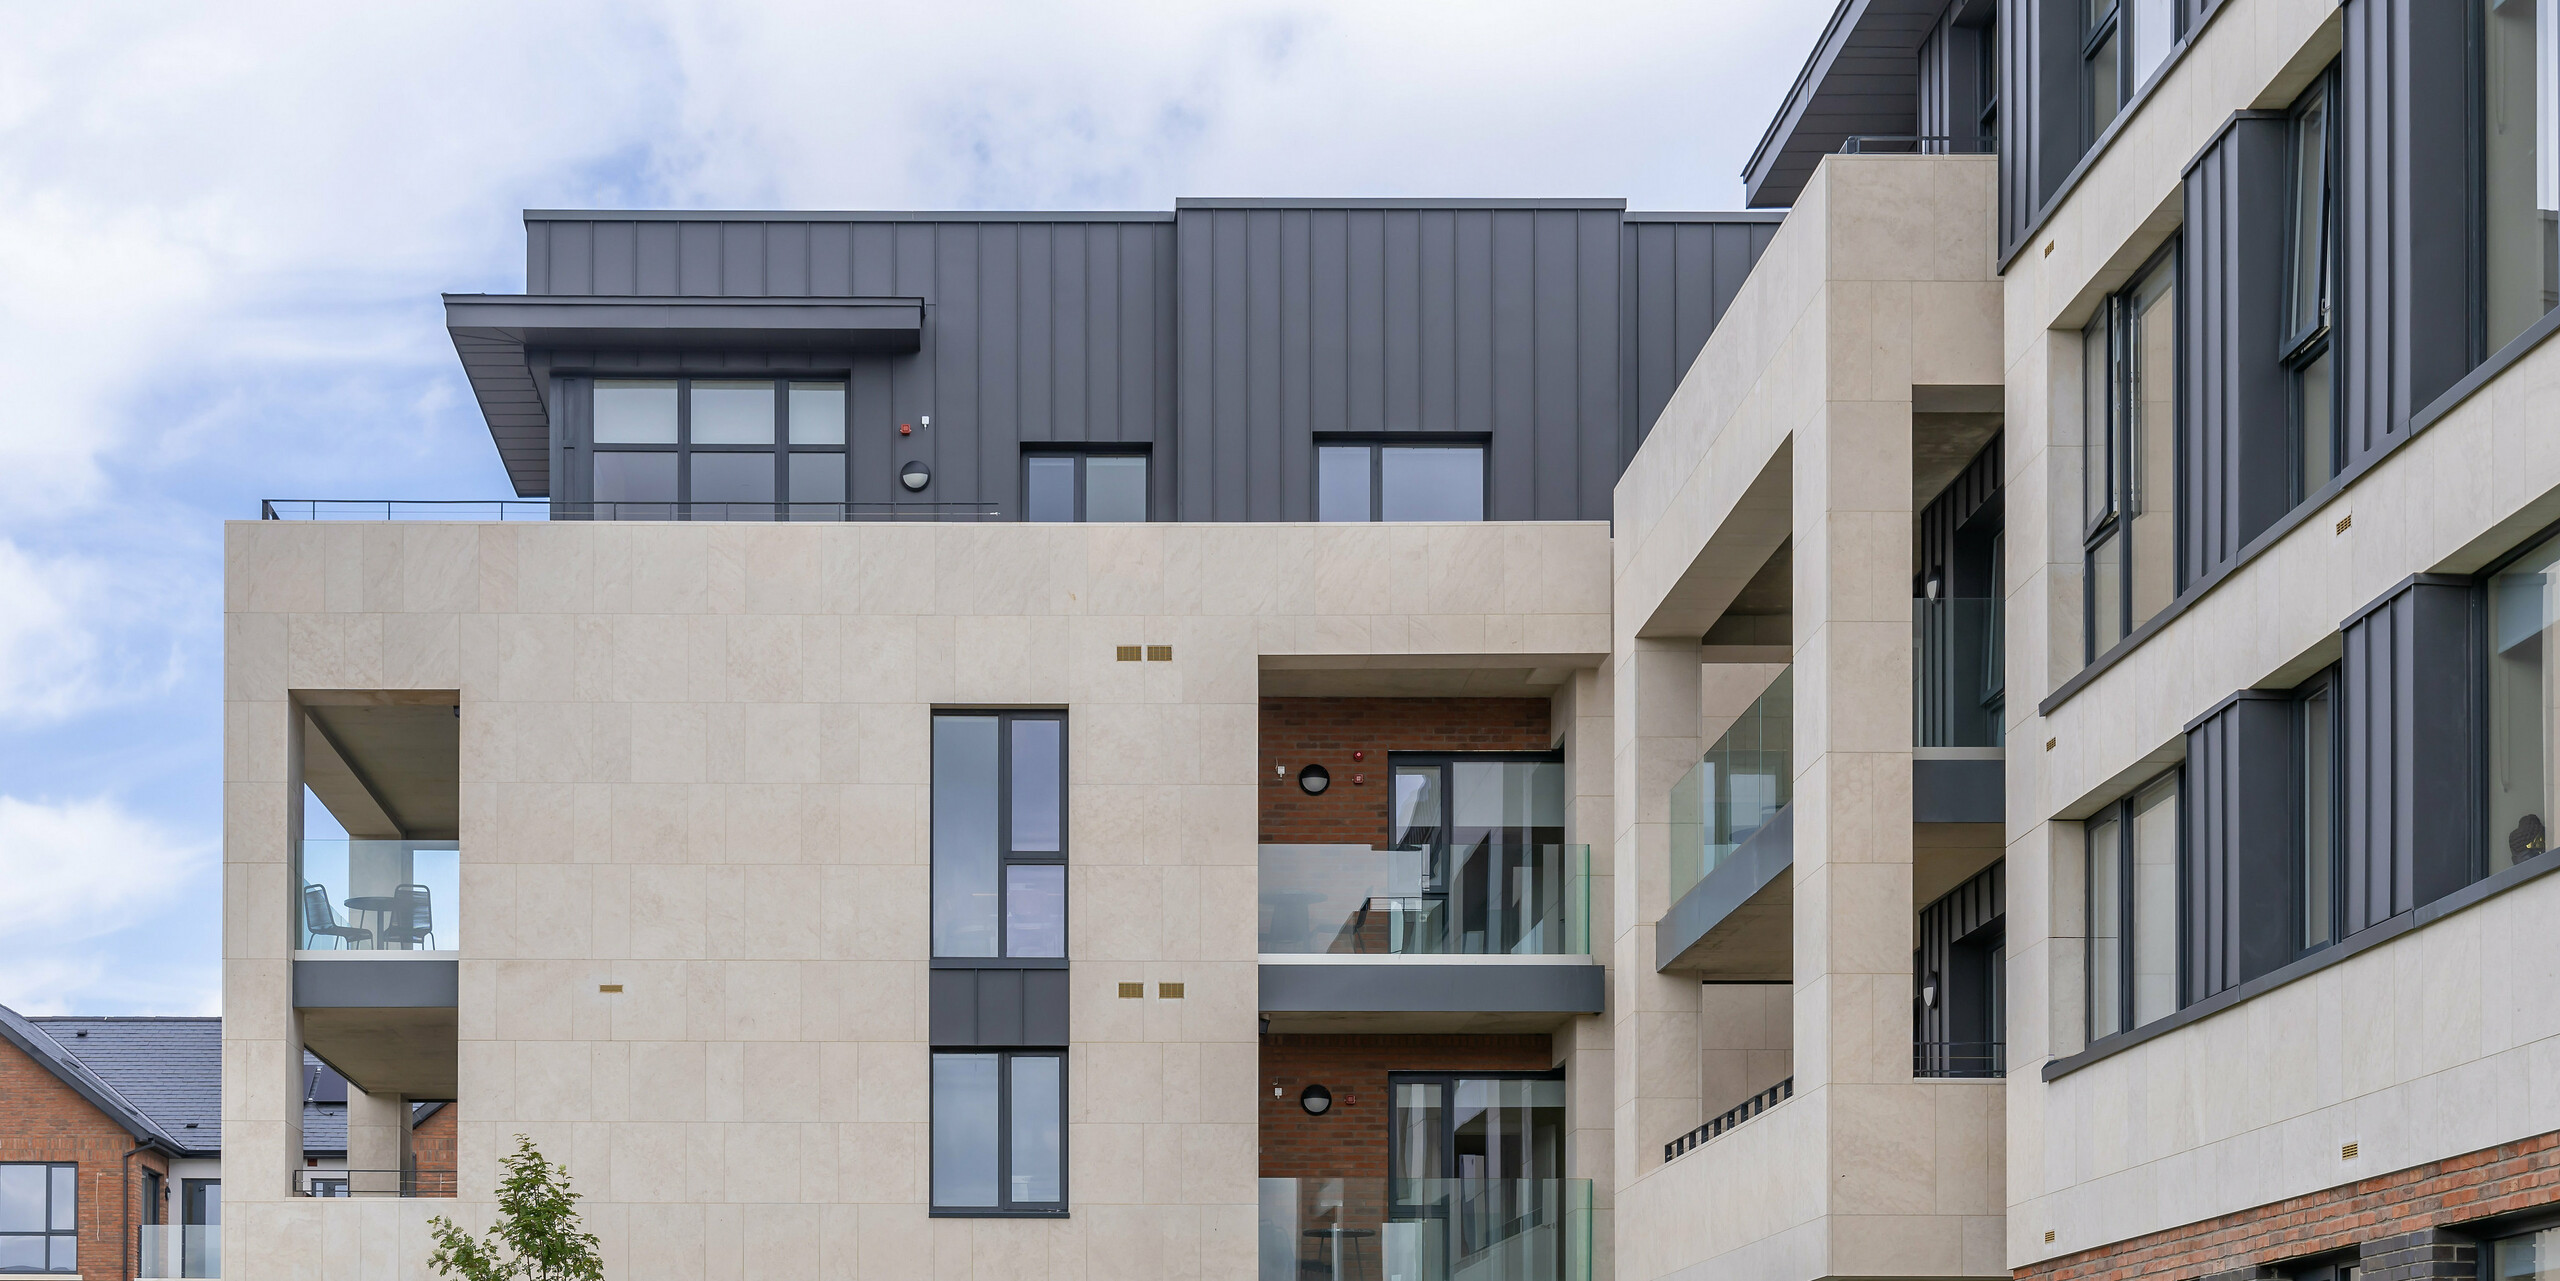 In Mount Merrion in the south of Dublin stands the building complex of Oatlands Manor. The exterior of the buildings has been clad with an aluminium envelope from PREFA.